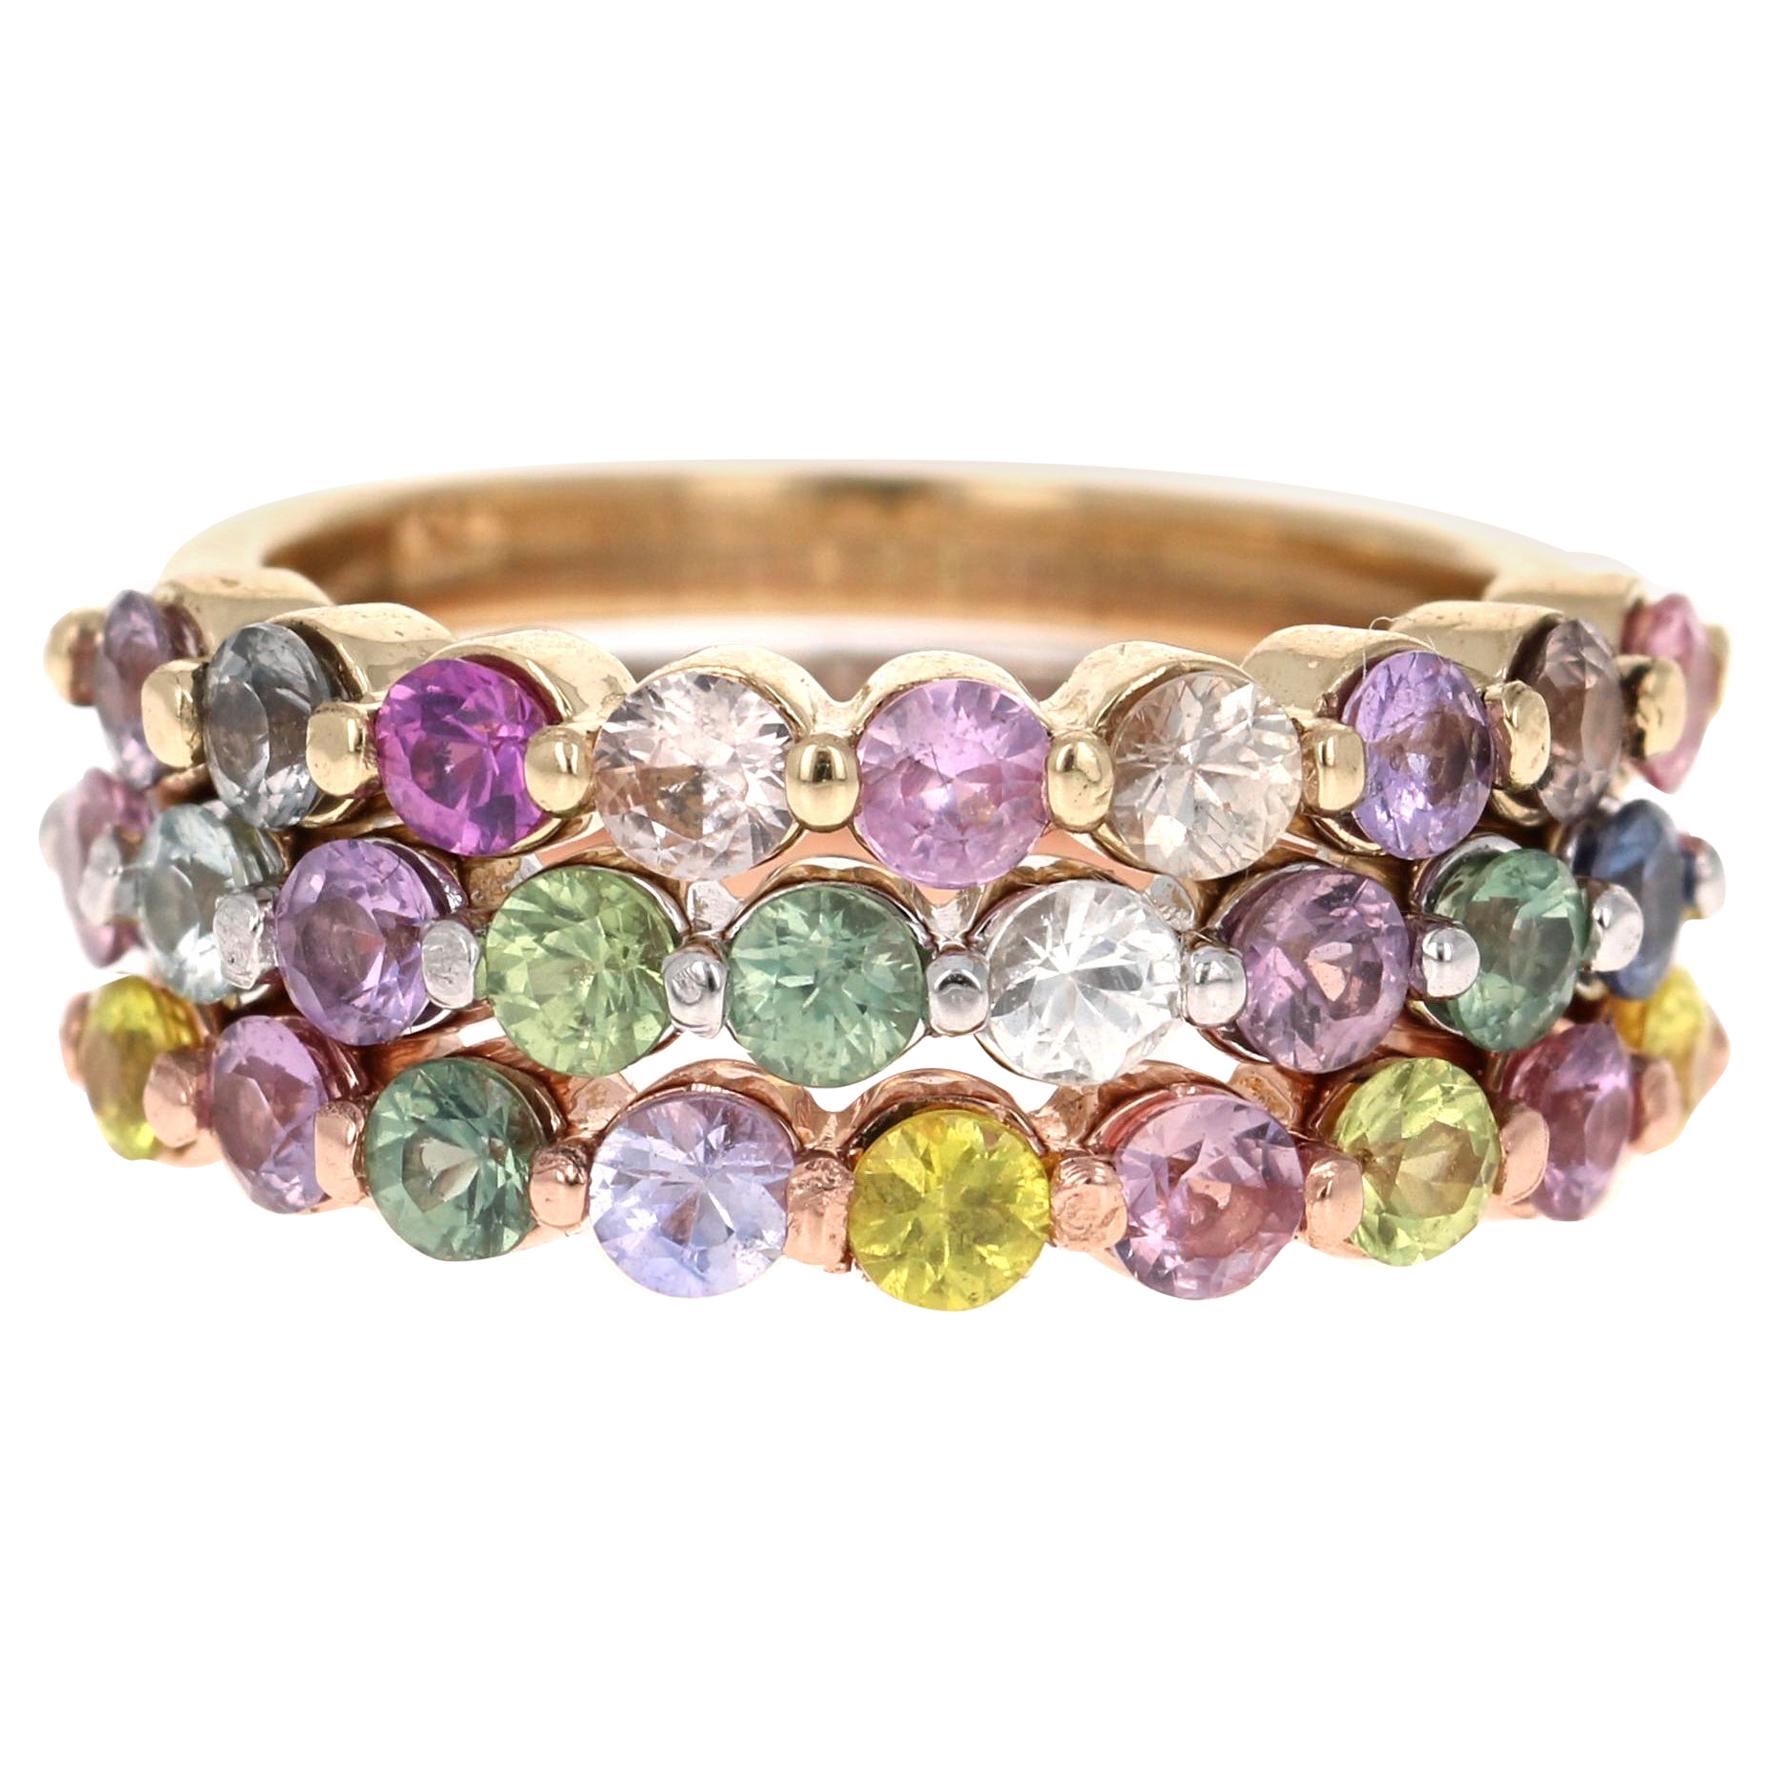 3.32 Carat Round Cut Multicolored Sapphire Diamond 14 Karat Gold Stackable Bands in Rose, Yellow, and White Gold.  
The Sapphire and Diamond combination looks so glamorous and chic stacked up that it is sure to be a great addition to your jewelry